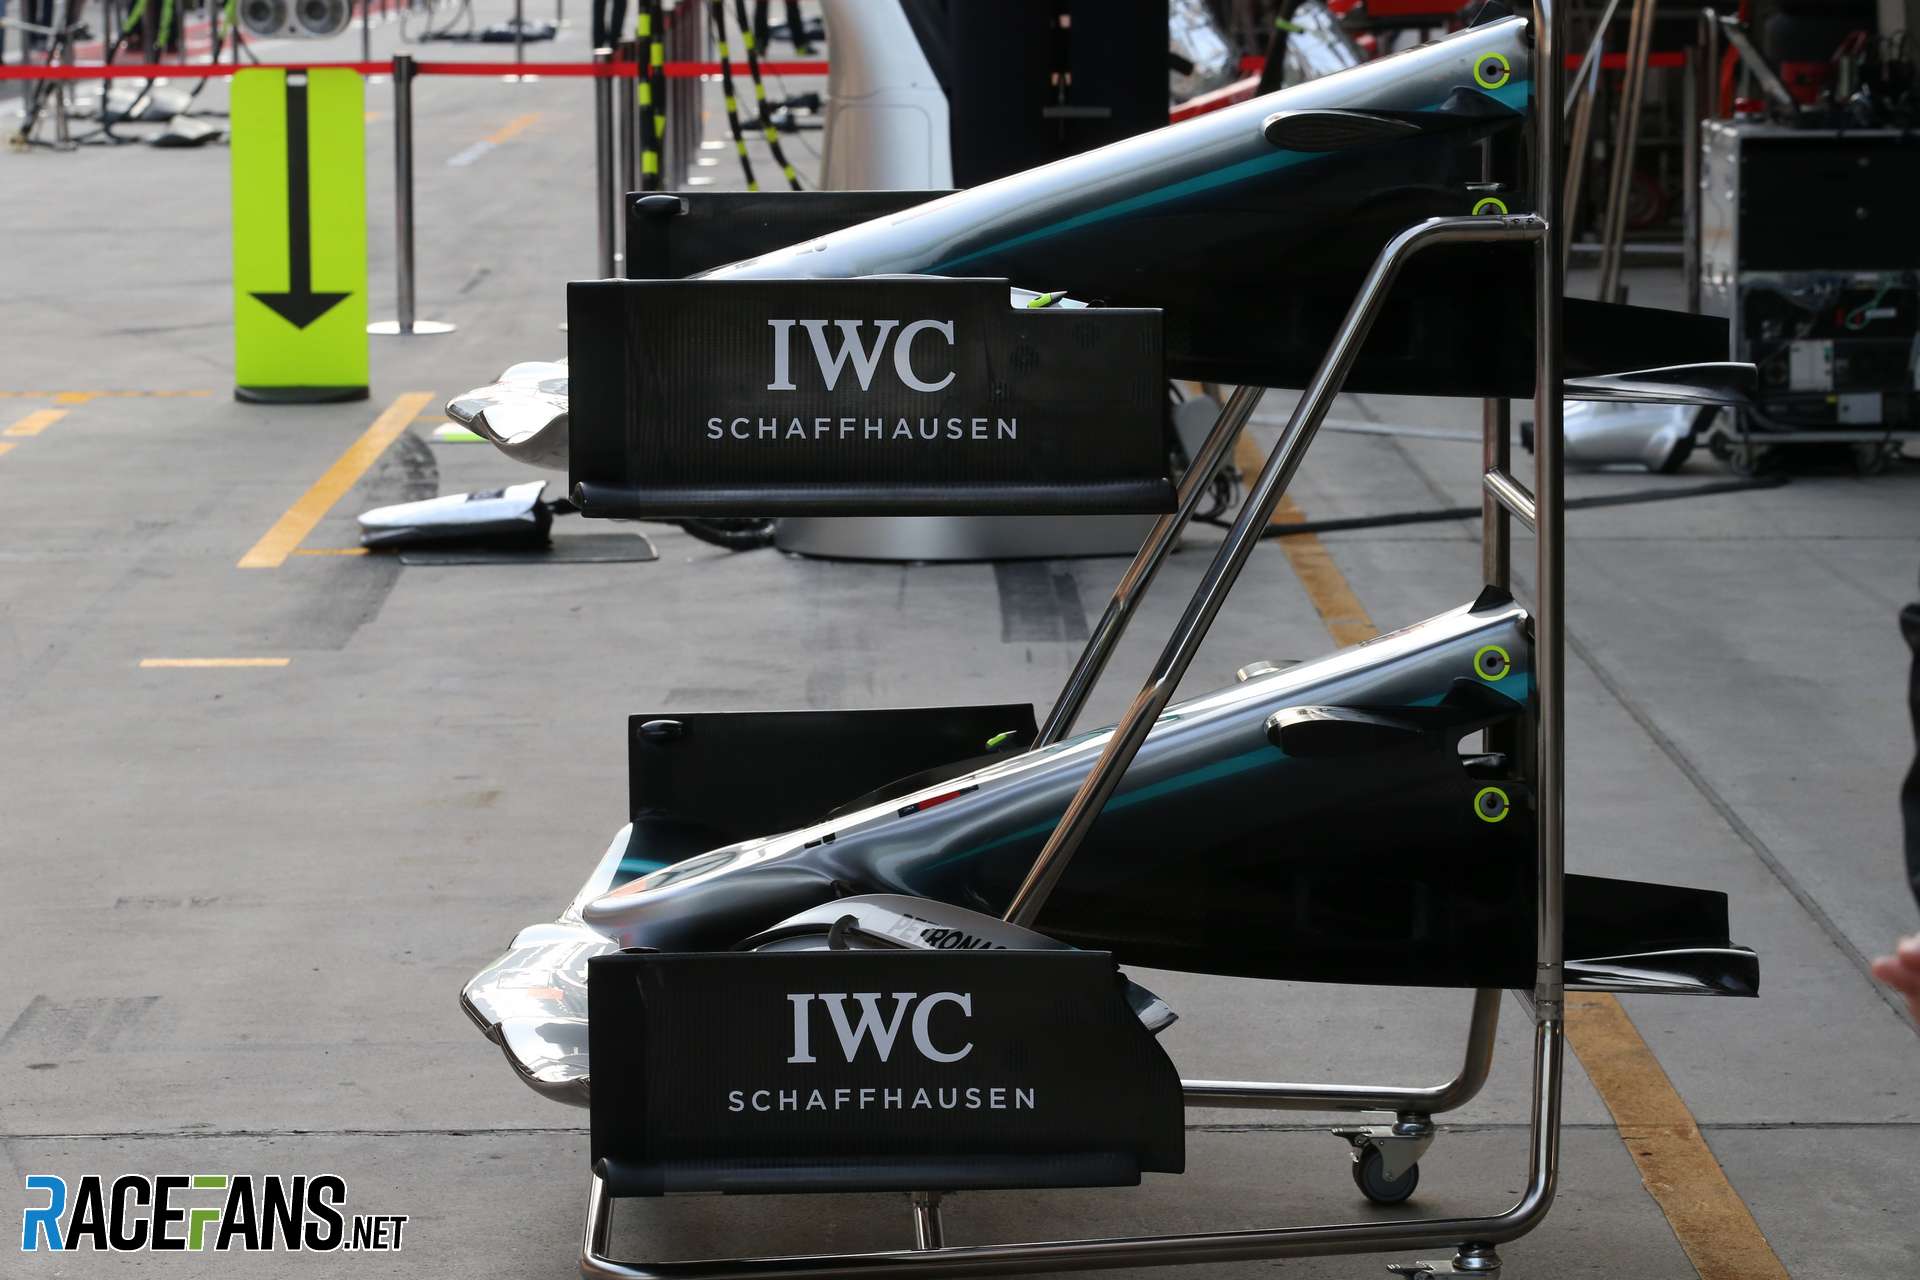 Mercedes old and new front wing endplates, Shanghai International Circuit, 2019